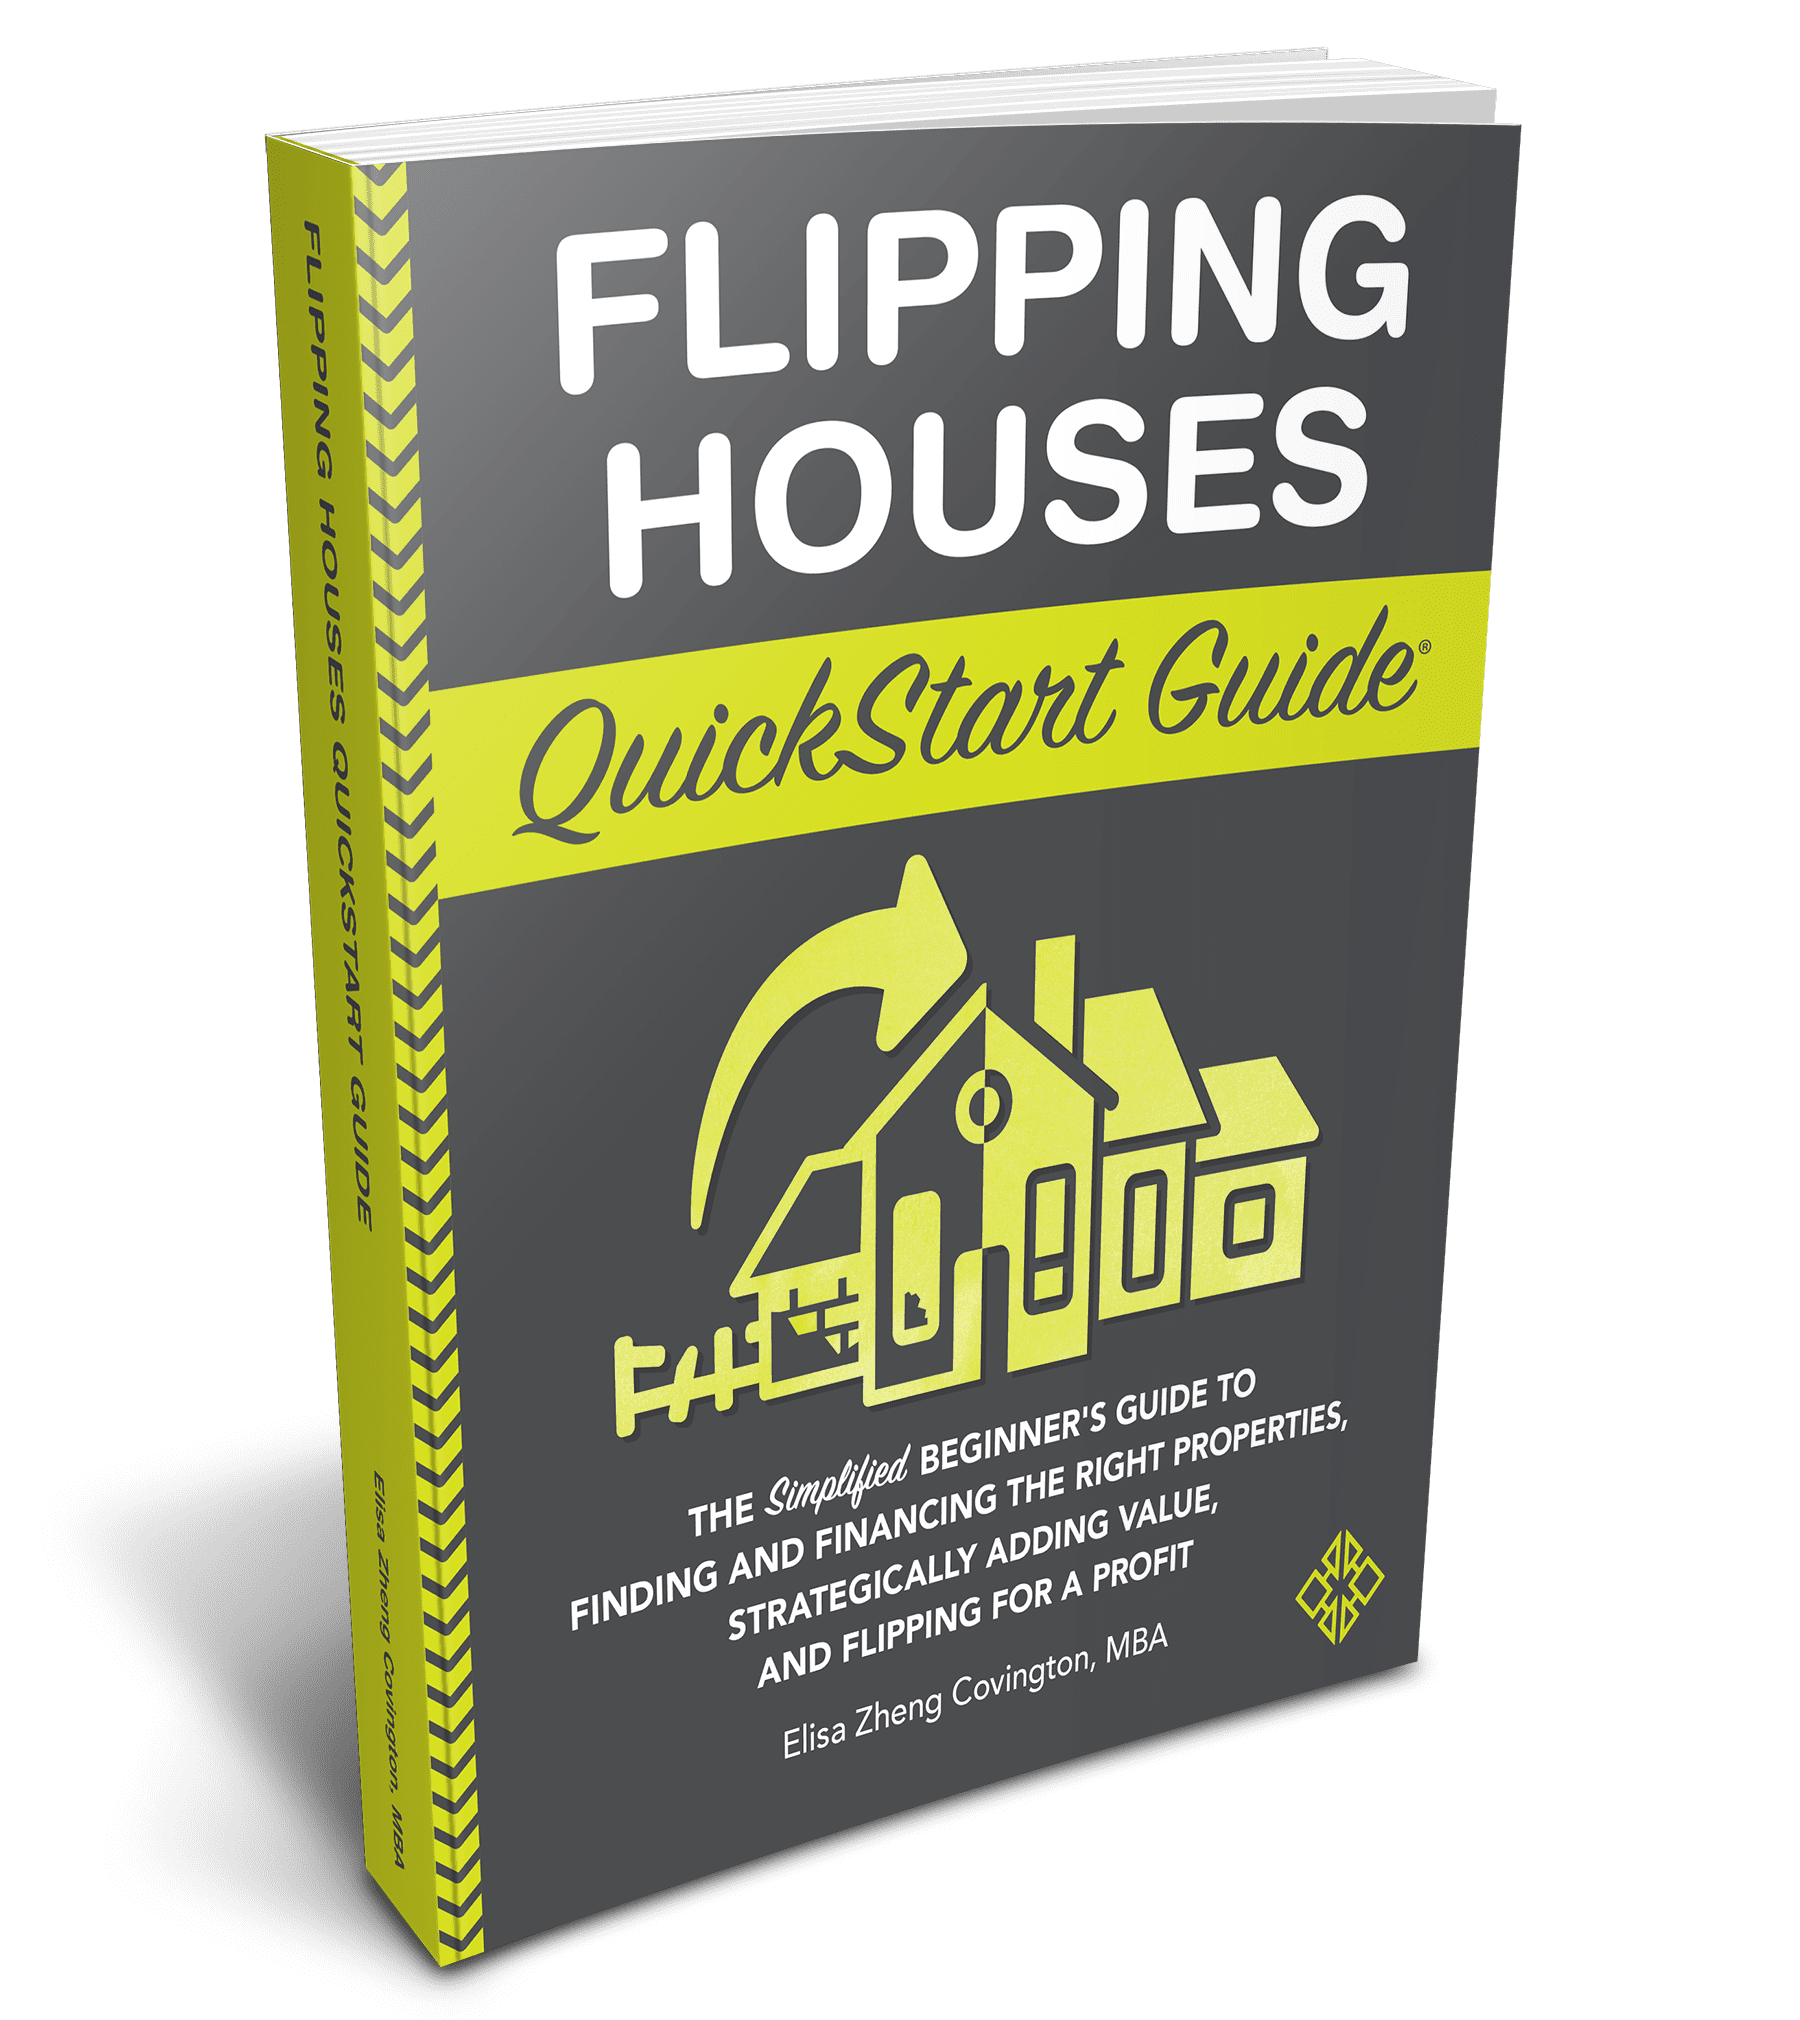 3D Render of Flipping Houses QuickStart Guide Cover by Eliza Zheng Covington, MBA